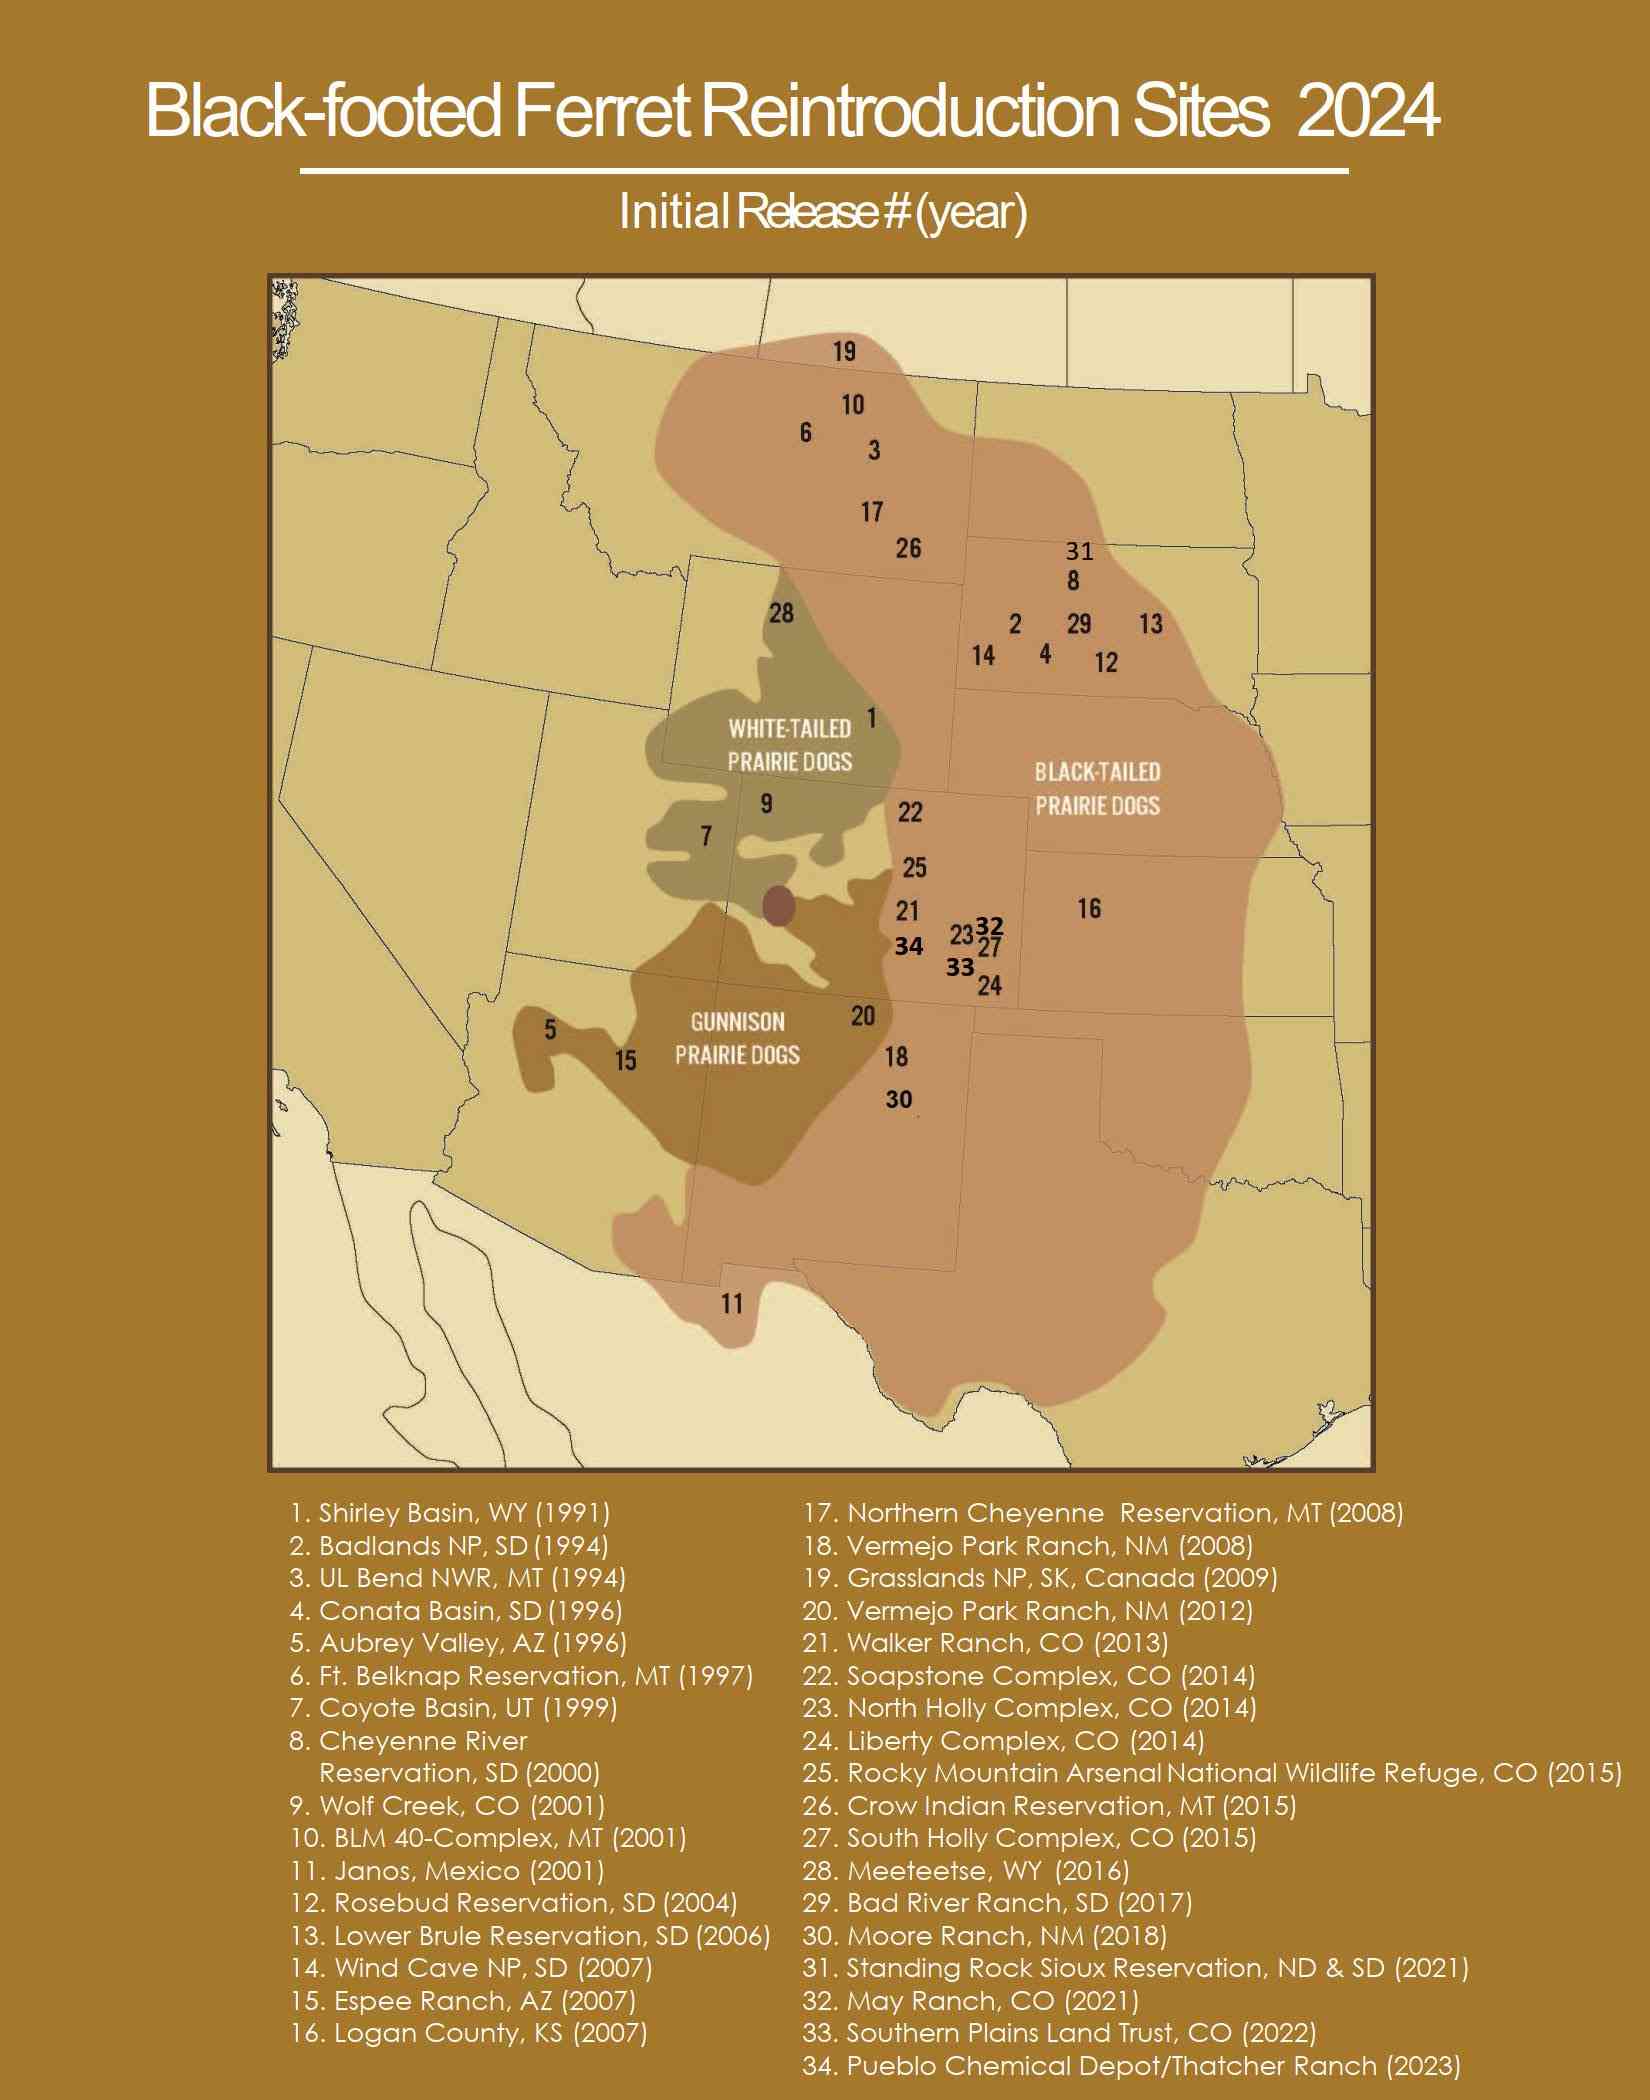 Black-footed Ferret Reintroduction Site 2024 graphic- USFWS